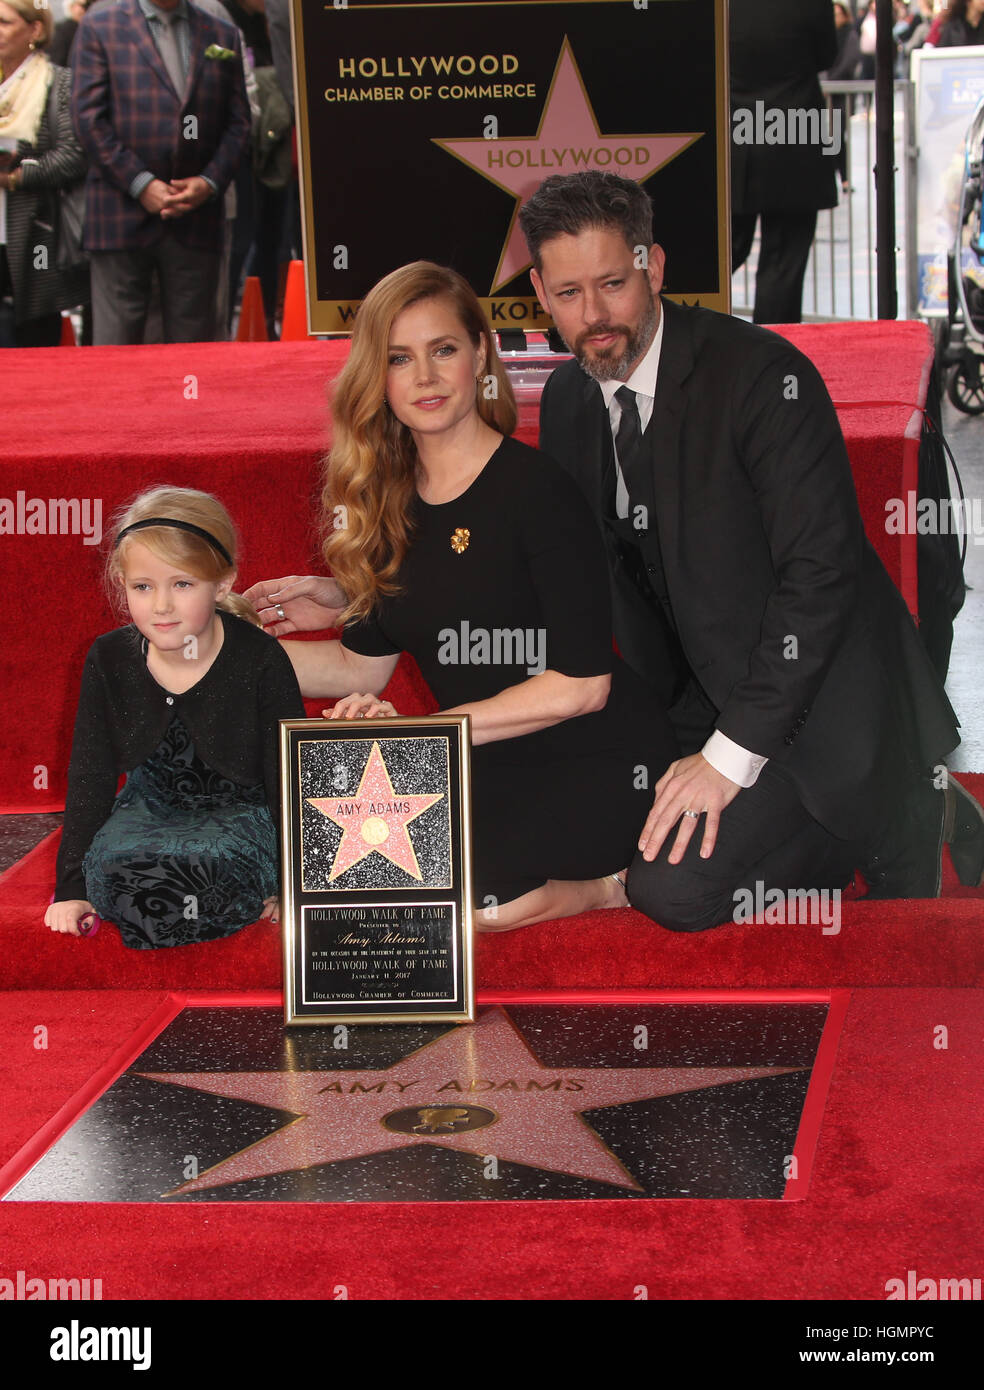 Hollywood, USA. 11th Jan, 2017. Actress Amy Adams with daughter Aviana Olea Le Gallo and husband Darren Le Gallo honored on the Hollywood Walk of Fame.  in Hollywood, California. © Faye Sadou/Media Punch/Alamy Live News Stock Photo